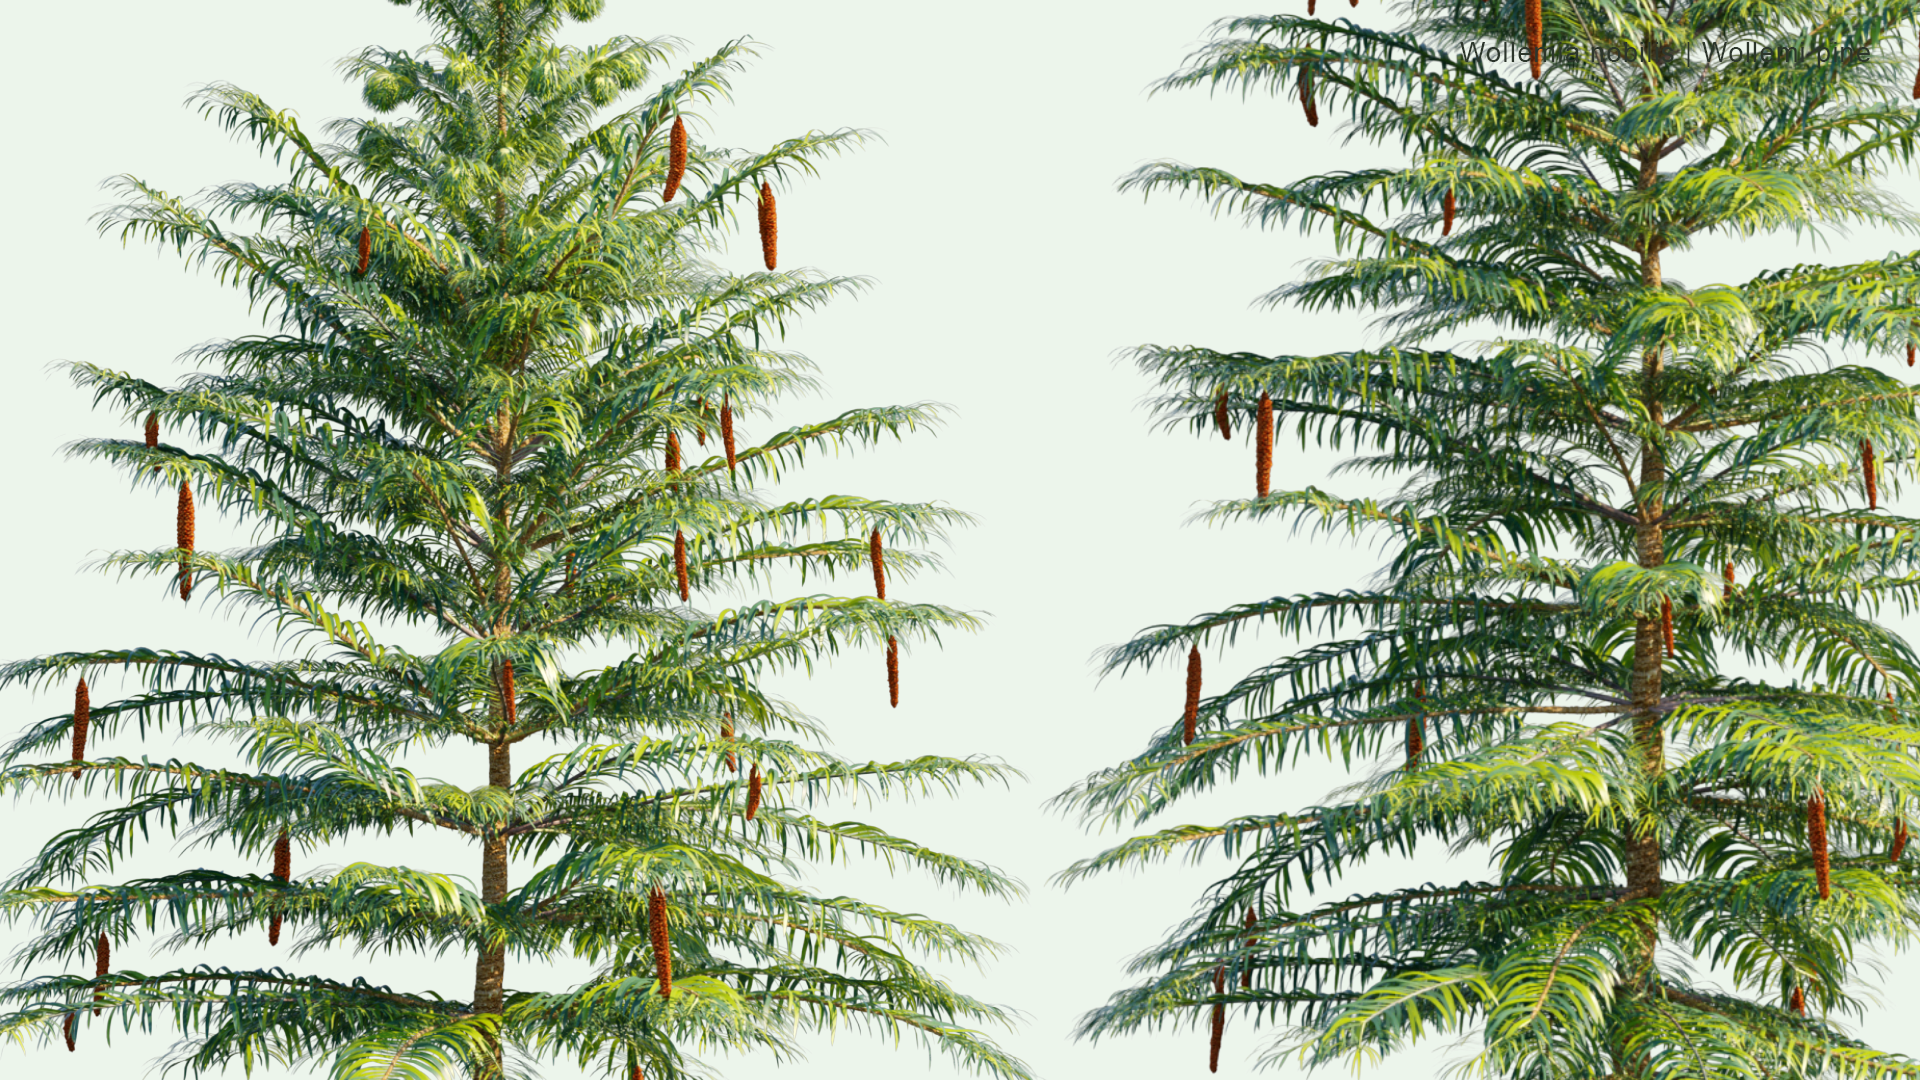 2D Wollemia Nobilis - Wollemi Pine